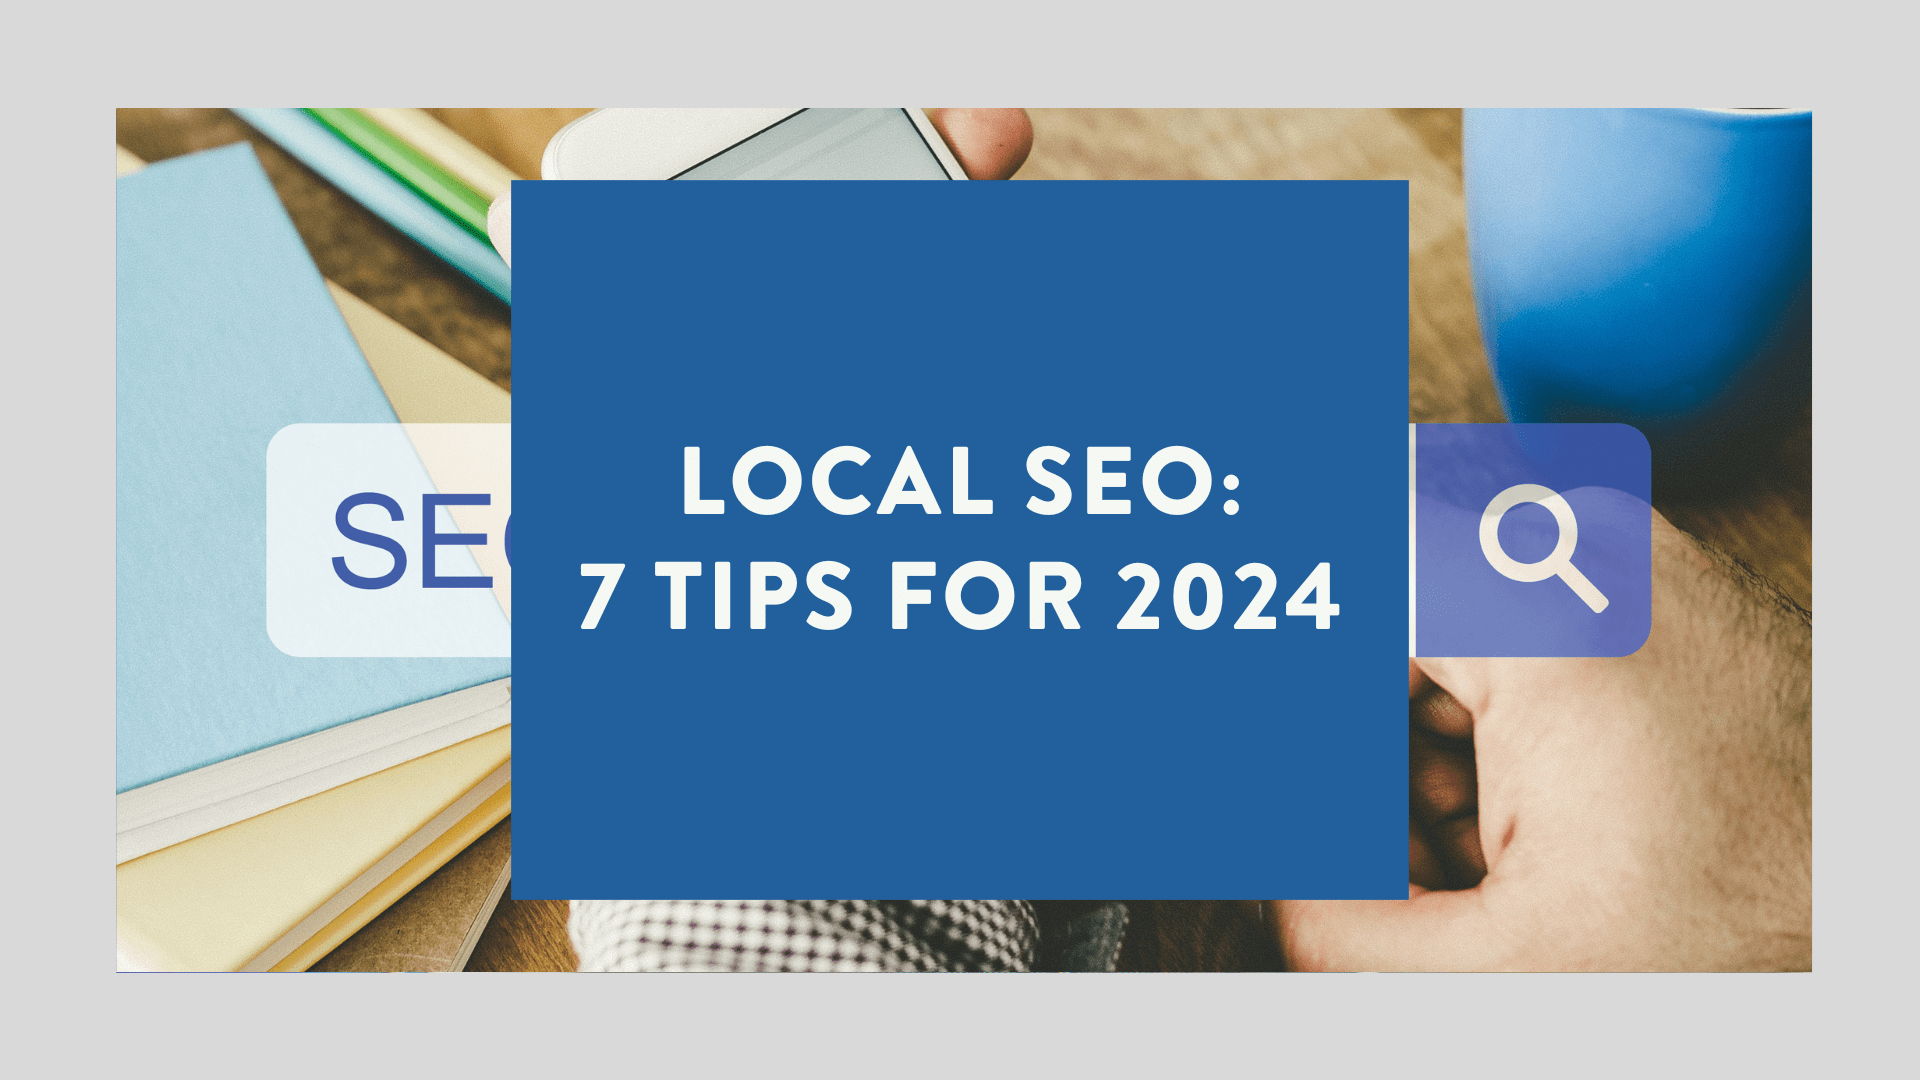 Local SEO 7 Tips for 2024